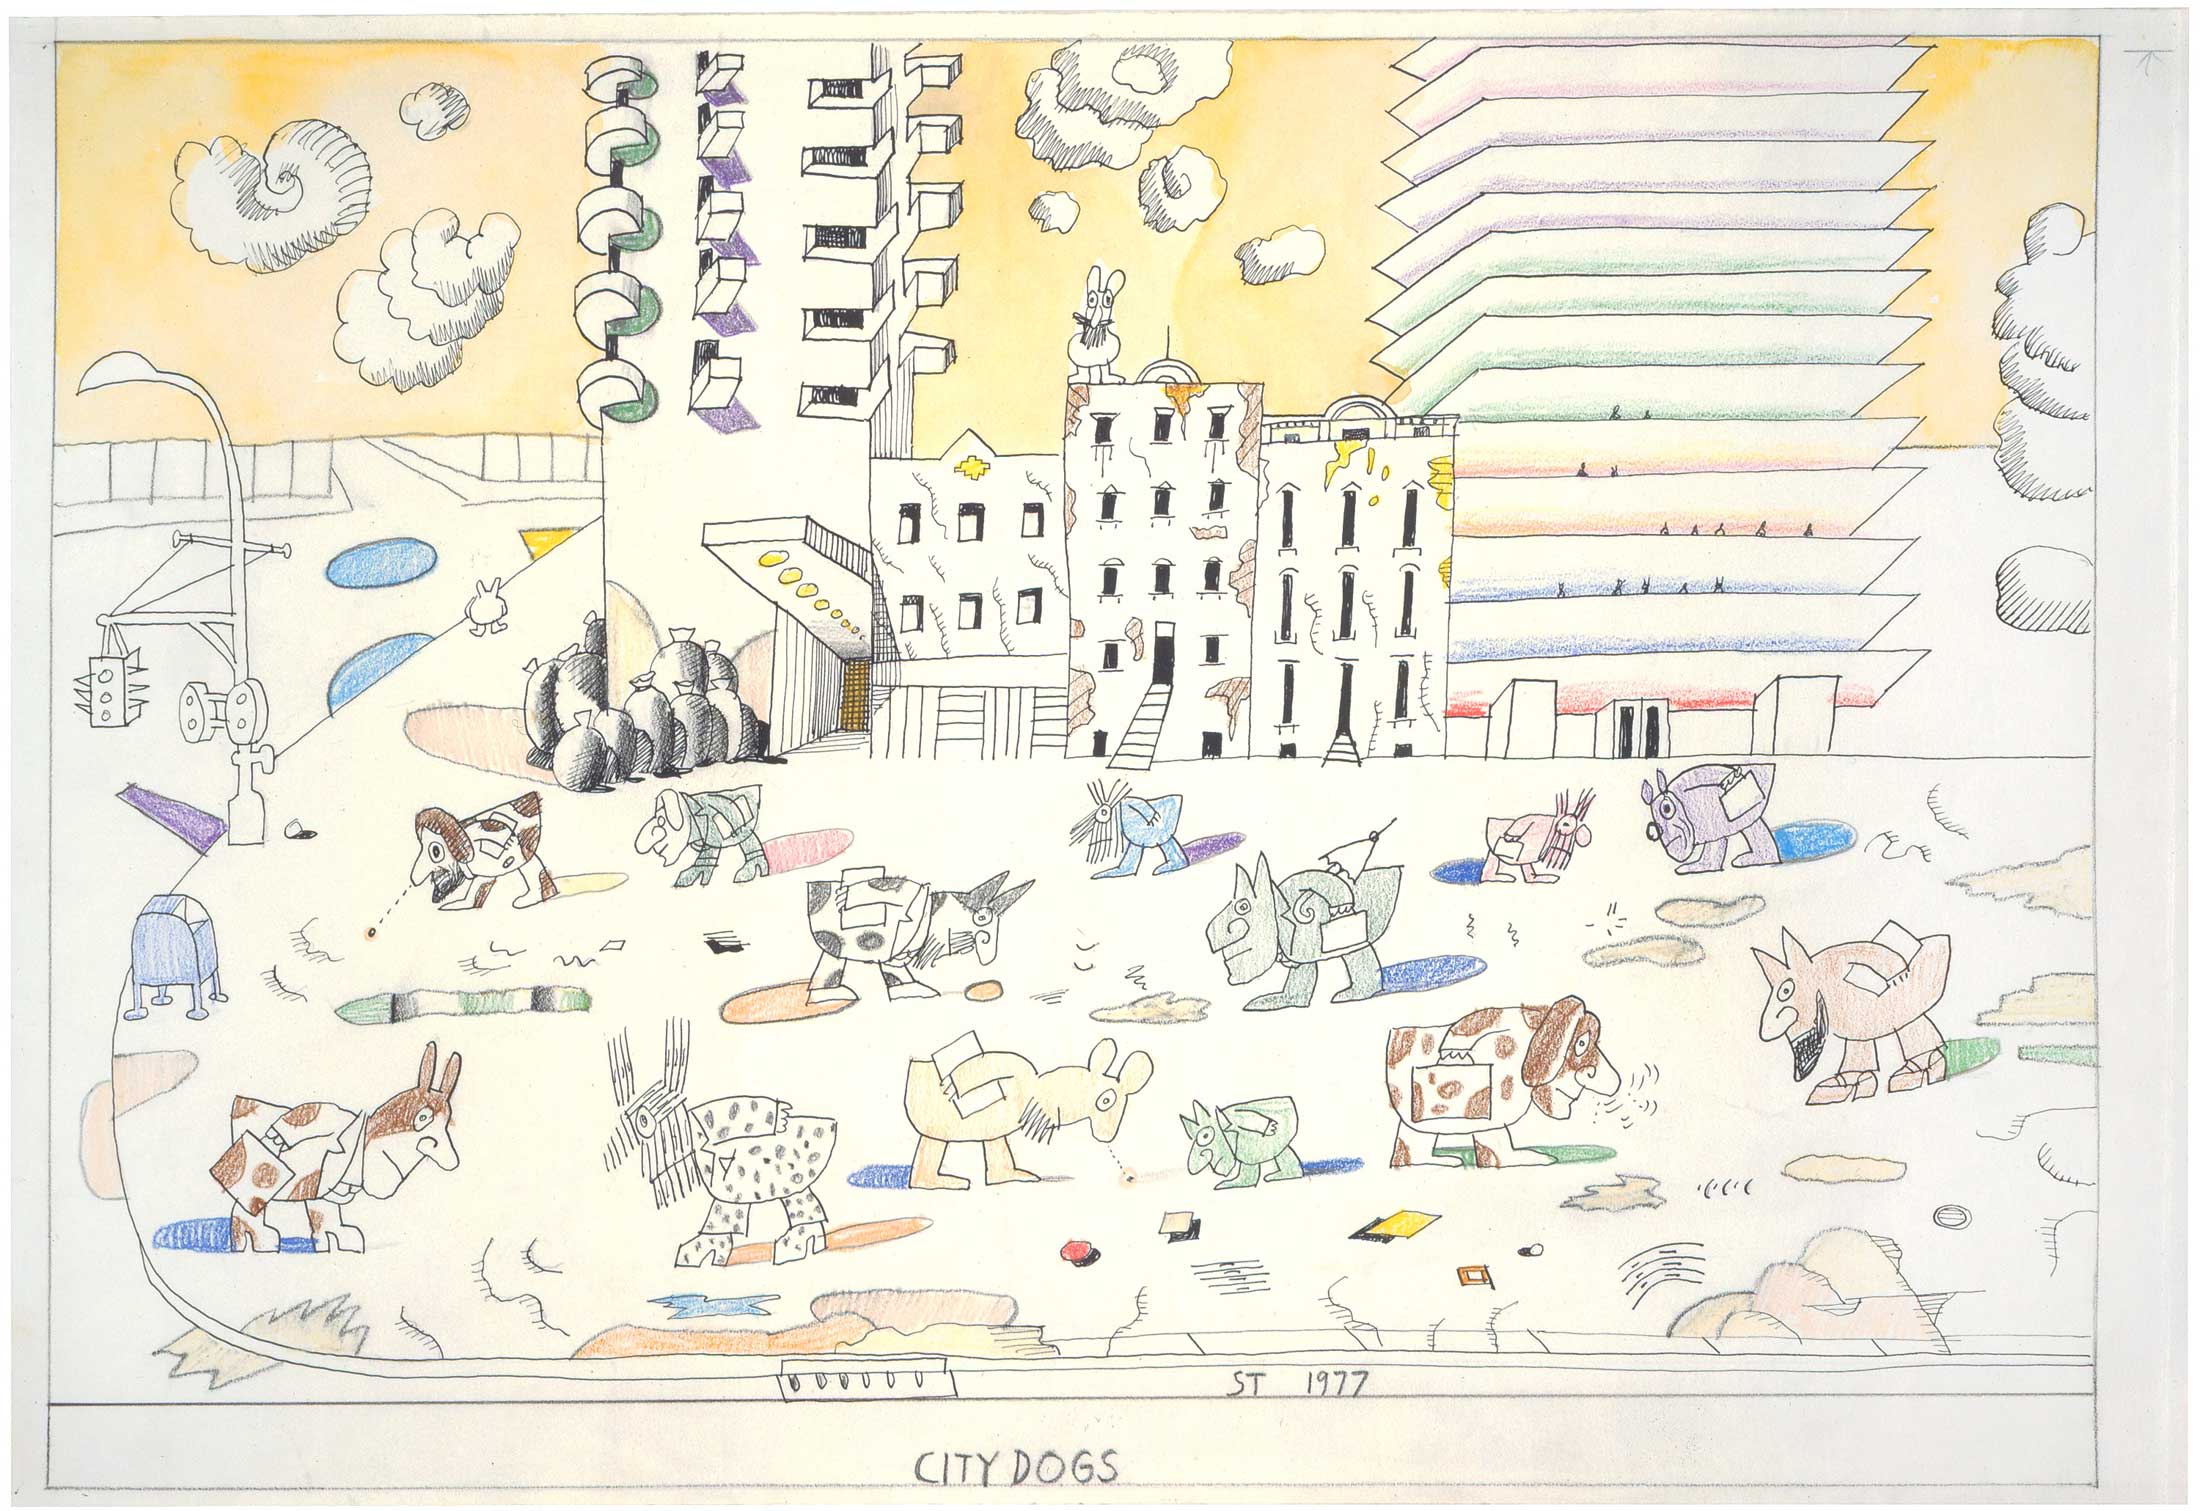 Original drawing for the portfolio “City Dogs,” The New Yorker, September 19, 1977. Crayon, ink, pencil, and watercolor on paper, 14 ½ x 23 in. Private collection.